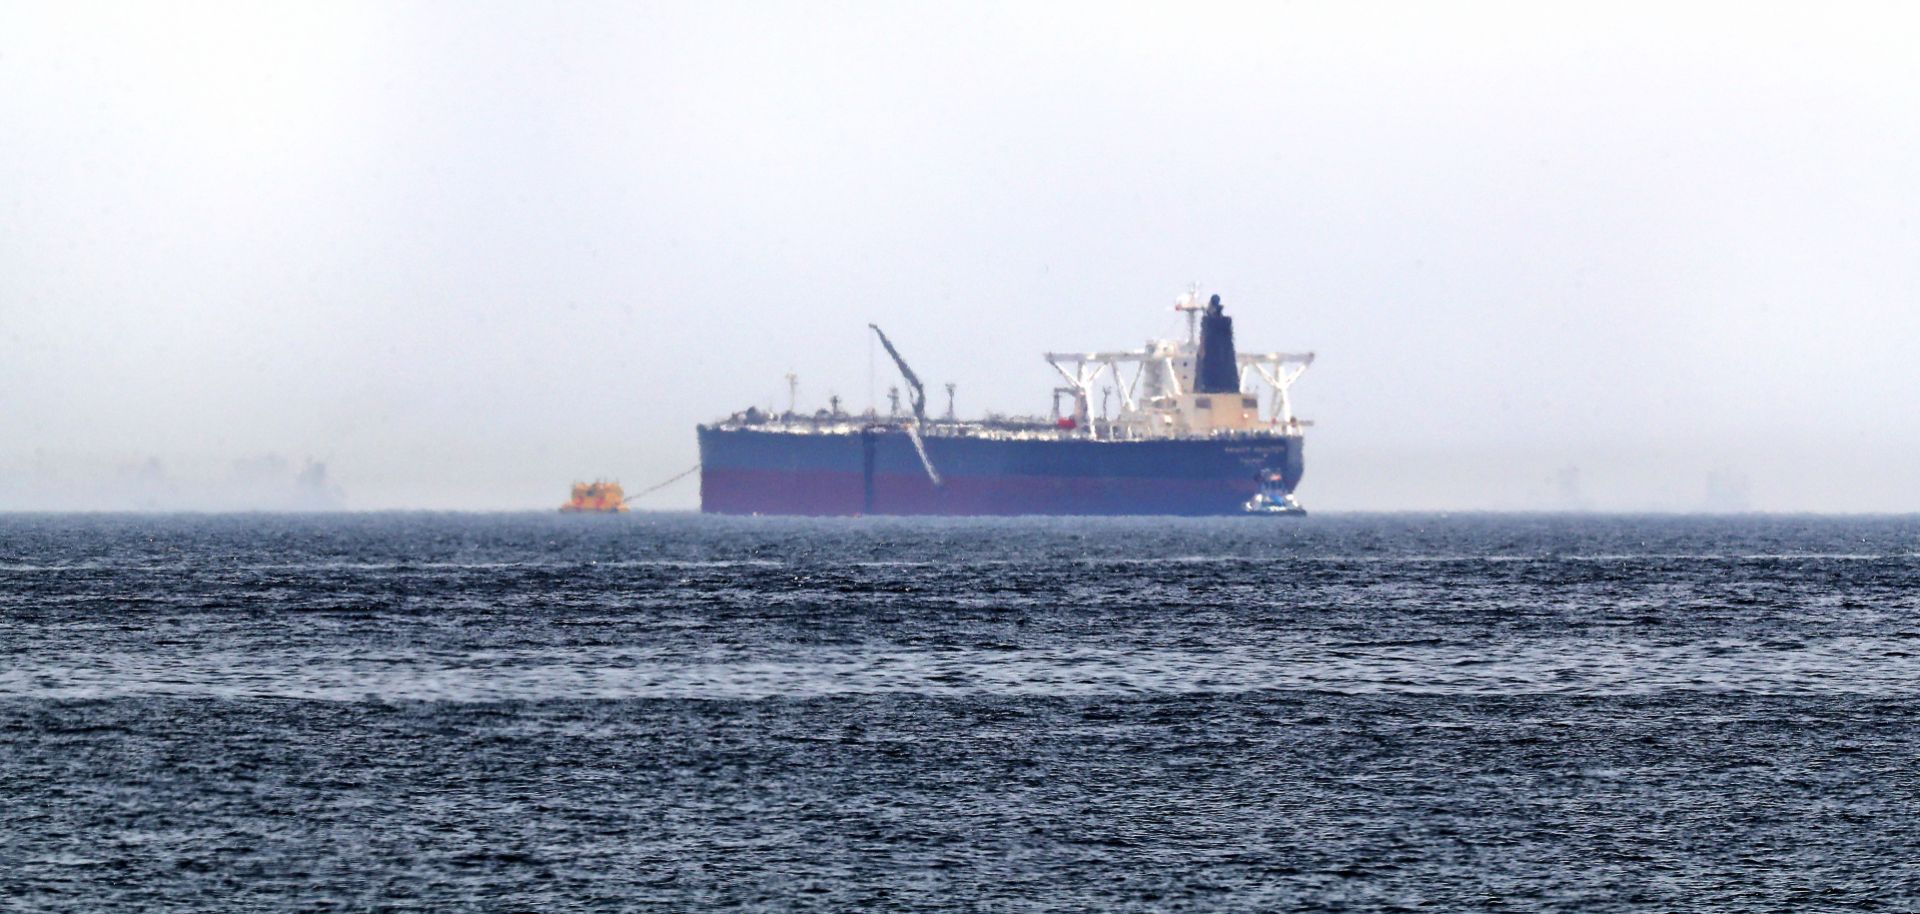 A picture taken on May 13, 2019, shows the crude oil tanker Amjad, one of two Saudi tankers that were reportedly damaged in mysterious "sabotage attacks," off the coast of the Gulf emirate of Fujairah.